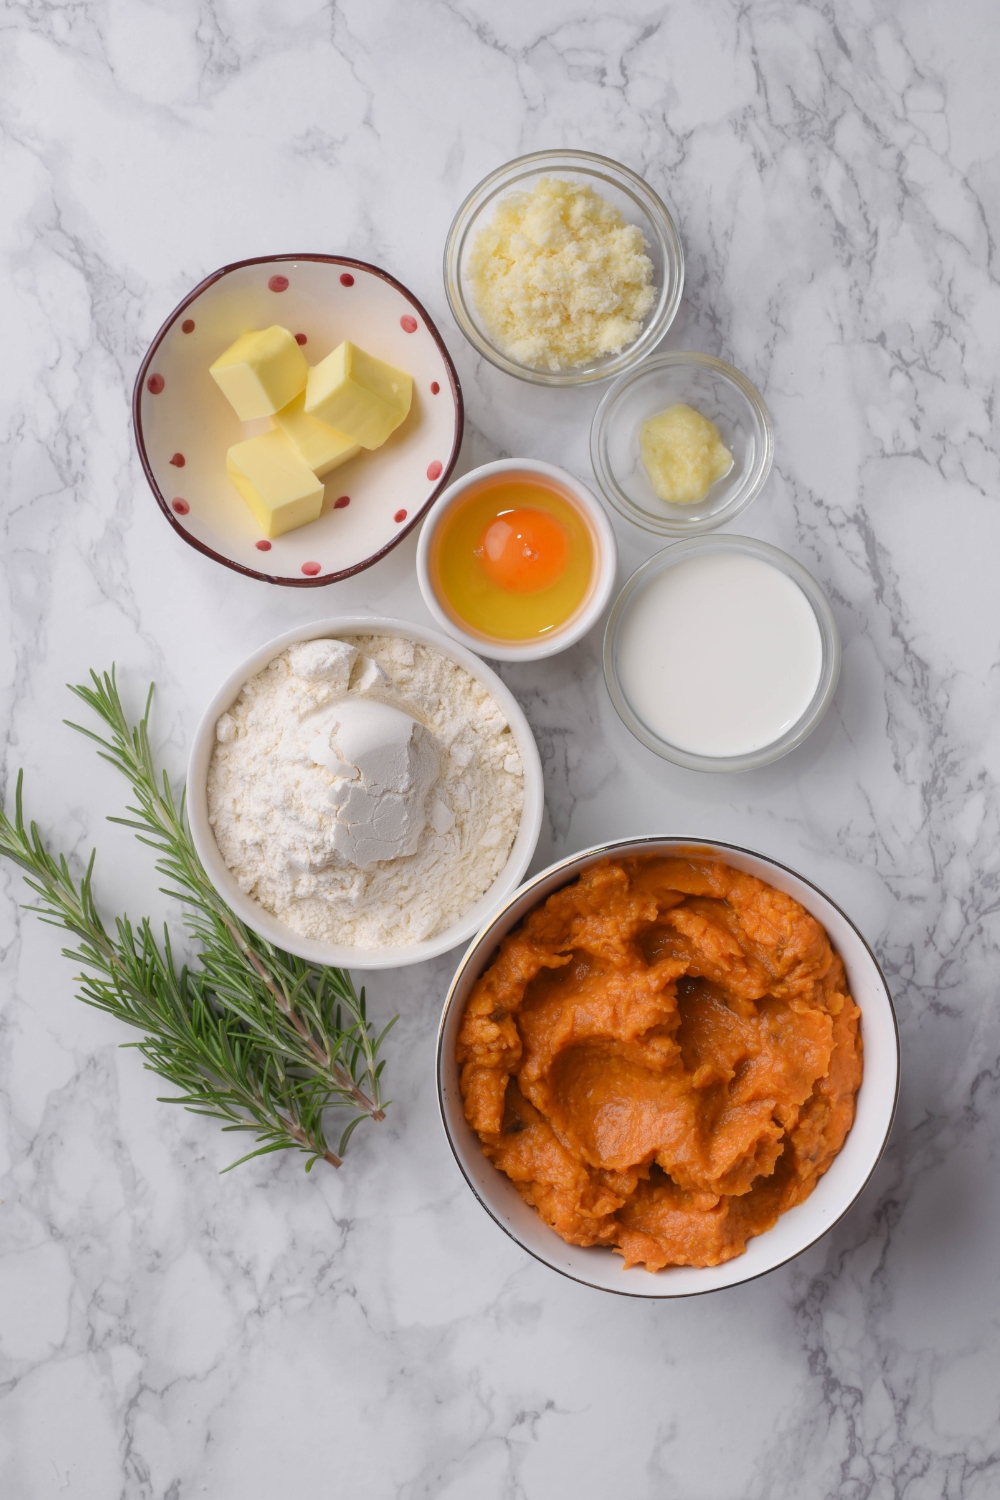 An assortment of ingredients including bowls of mashed sweet potato, an egg, butter cubes, flour, cream, parmesan cheese, and two sprigs of rosemary on a grey counter.